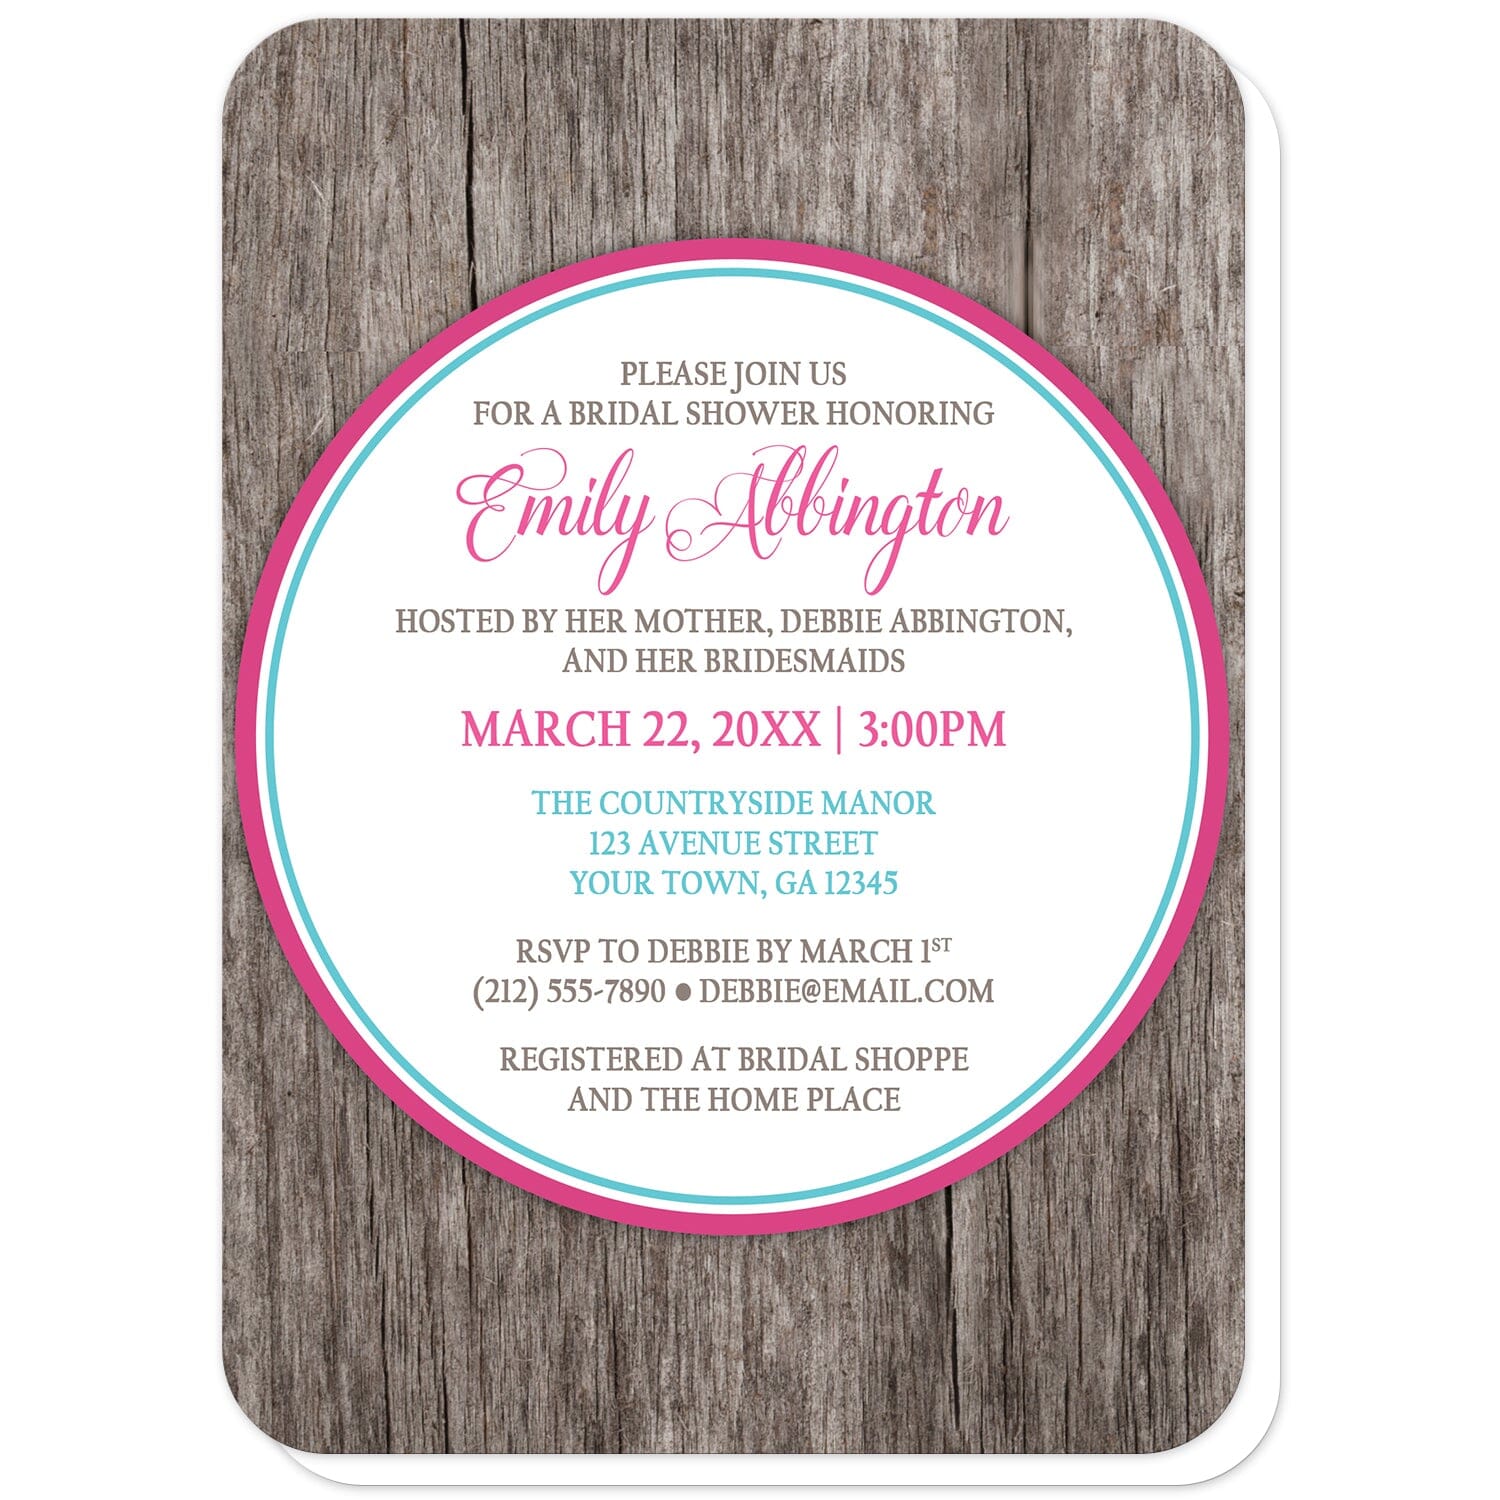 Fuchsia Turquoise Rustic Wood Bridal Shower Invitations (with rounded corners) at Artistically Invited. Fuchsia turquoise rustic wood bridal shower invitations with your personalized celebration details custom printed in fuchsia pink, turquoise, and brown inside a white circle outlined in pink and turquoise, over a rustic wood texture background.